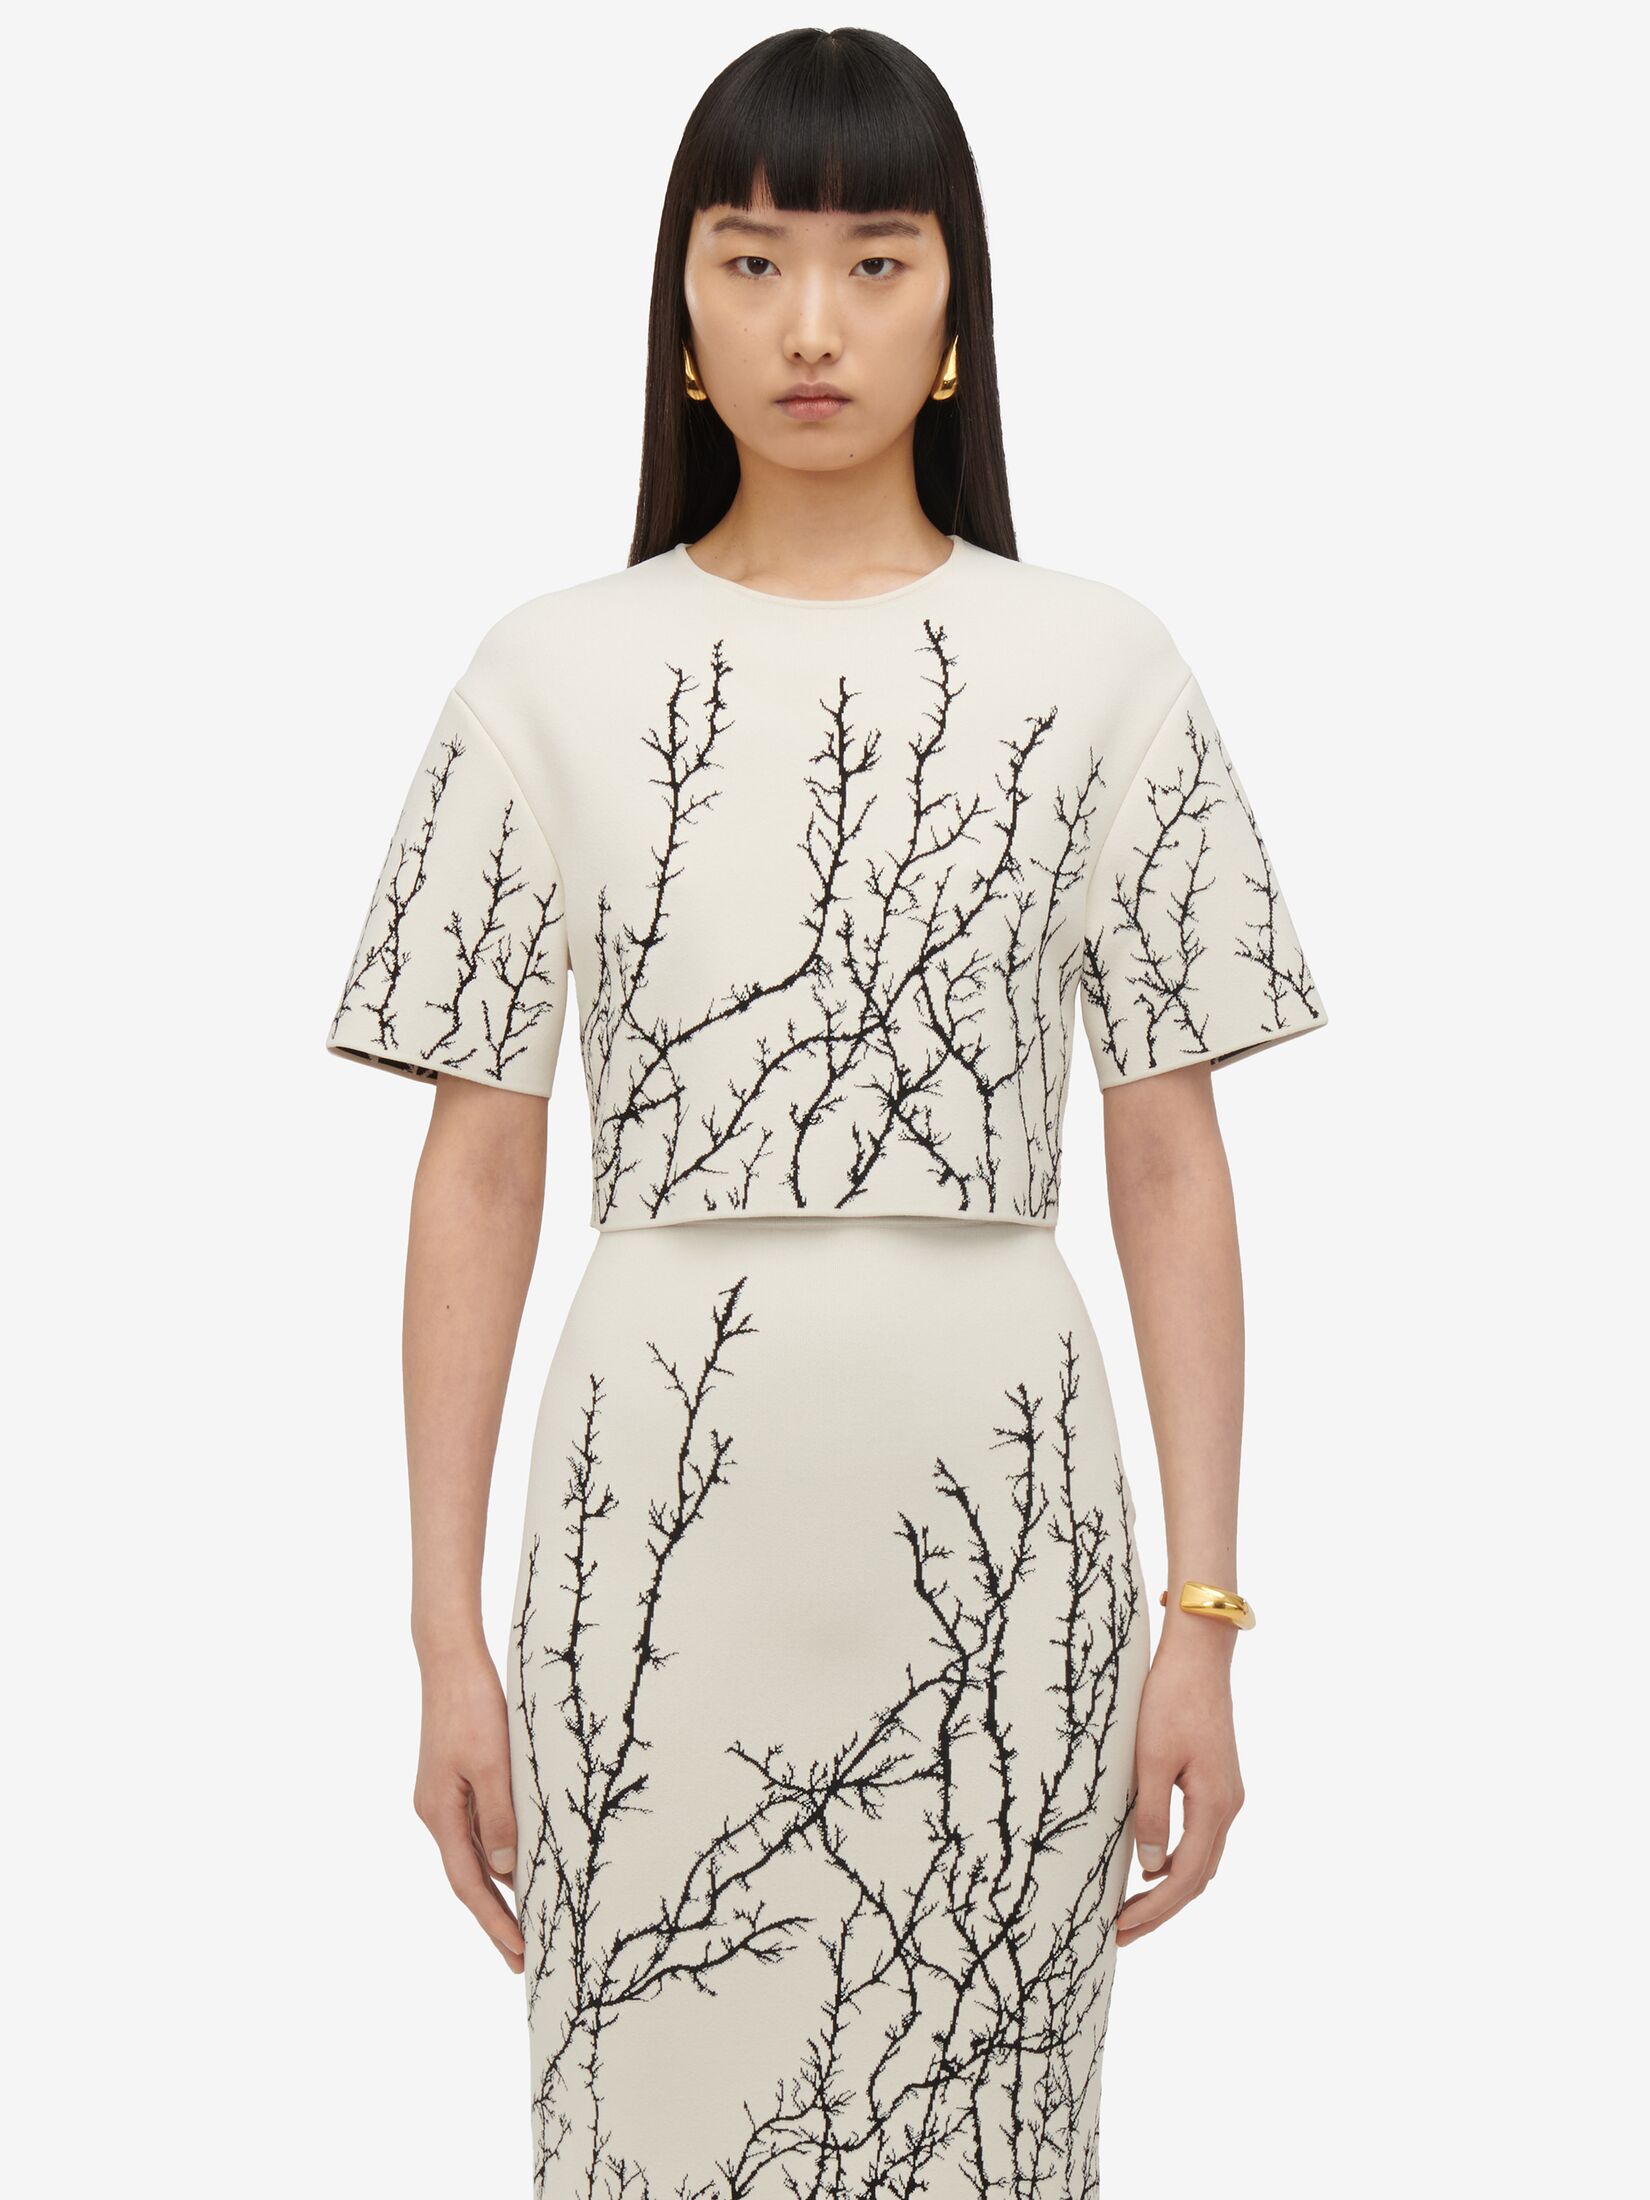 Thorn Branches Crop Top